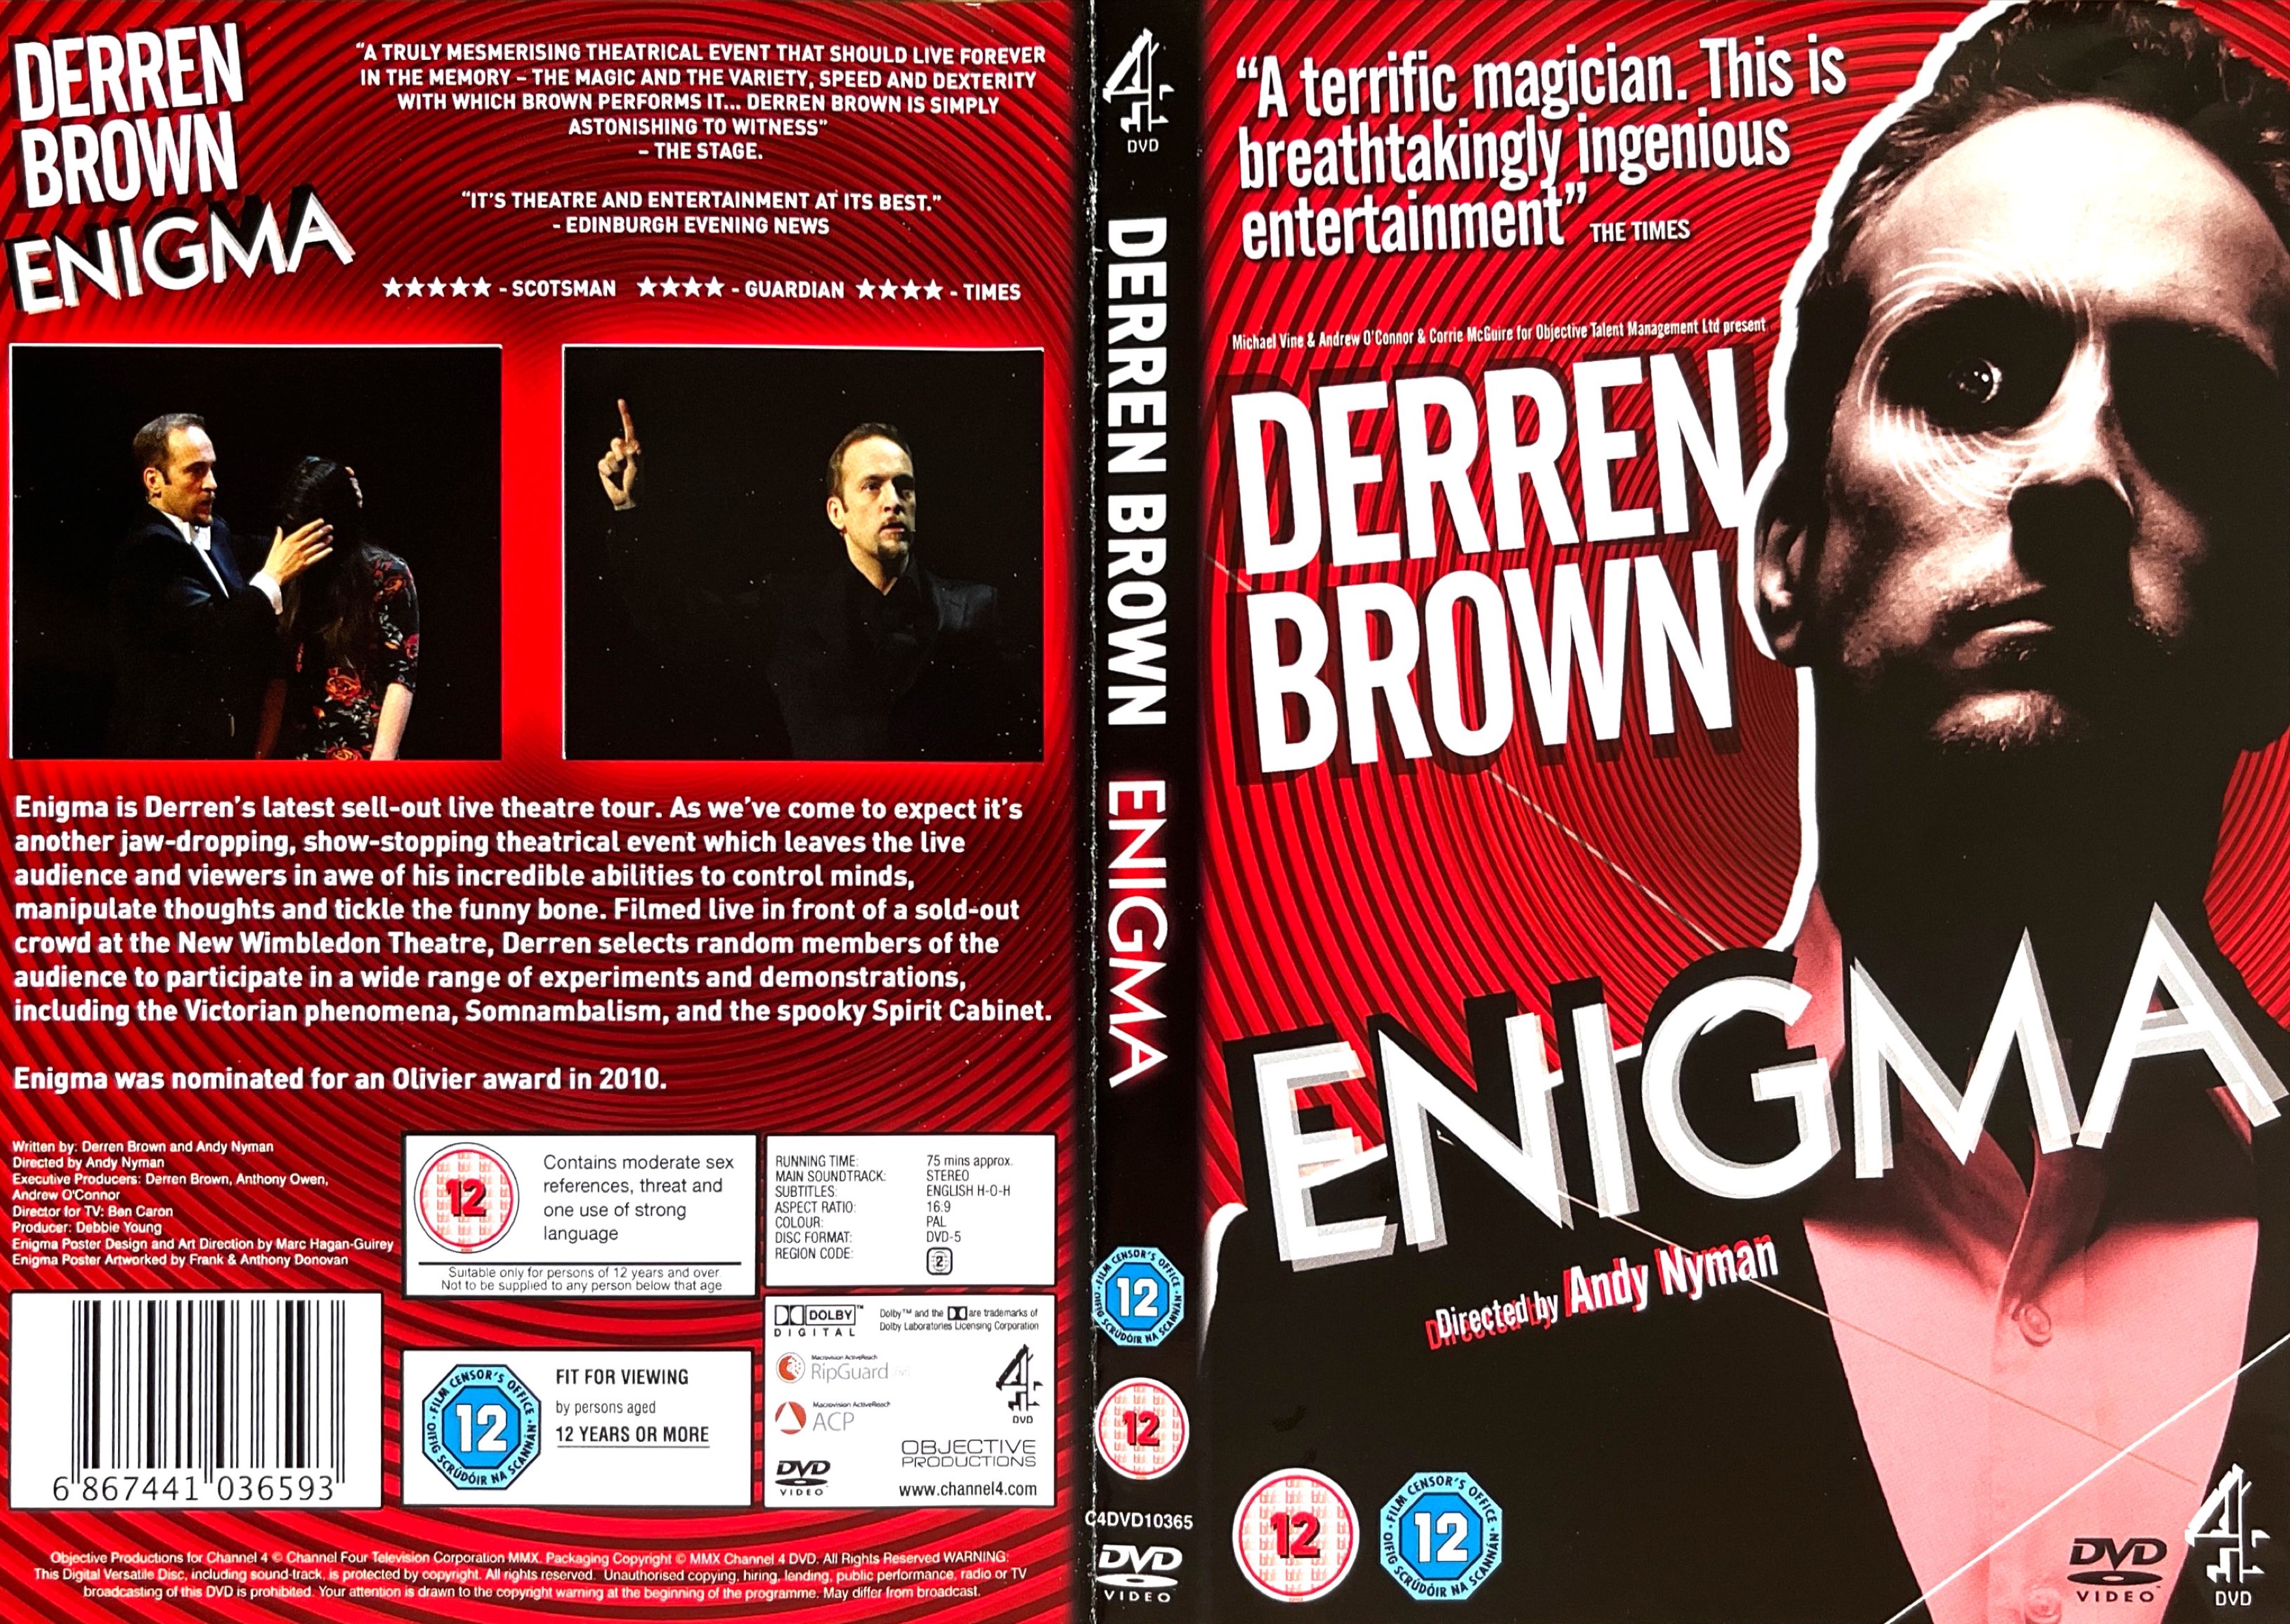 DVD cover spread for Derren Brown - Enigma. The front cover shows Derren against a background of red spiralling circles, while the back cover has images of Derren in action during the show amongst the details of the DVD.